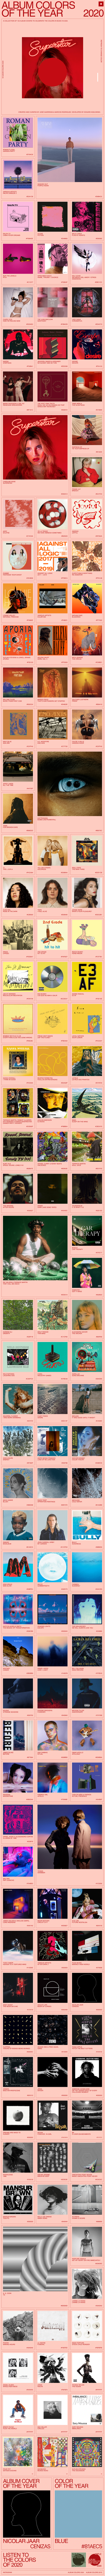 2020 - Album Colors Of The Year Landing Page Example: Over 150 covers creating a beautiful color palette.